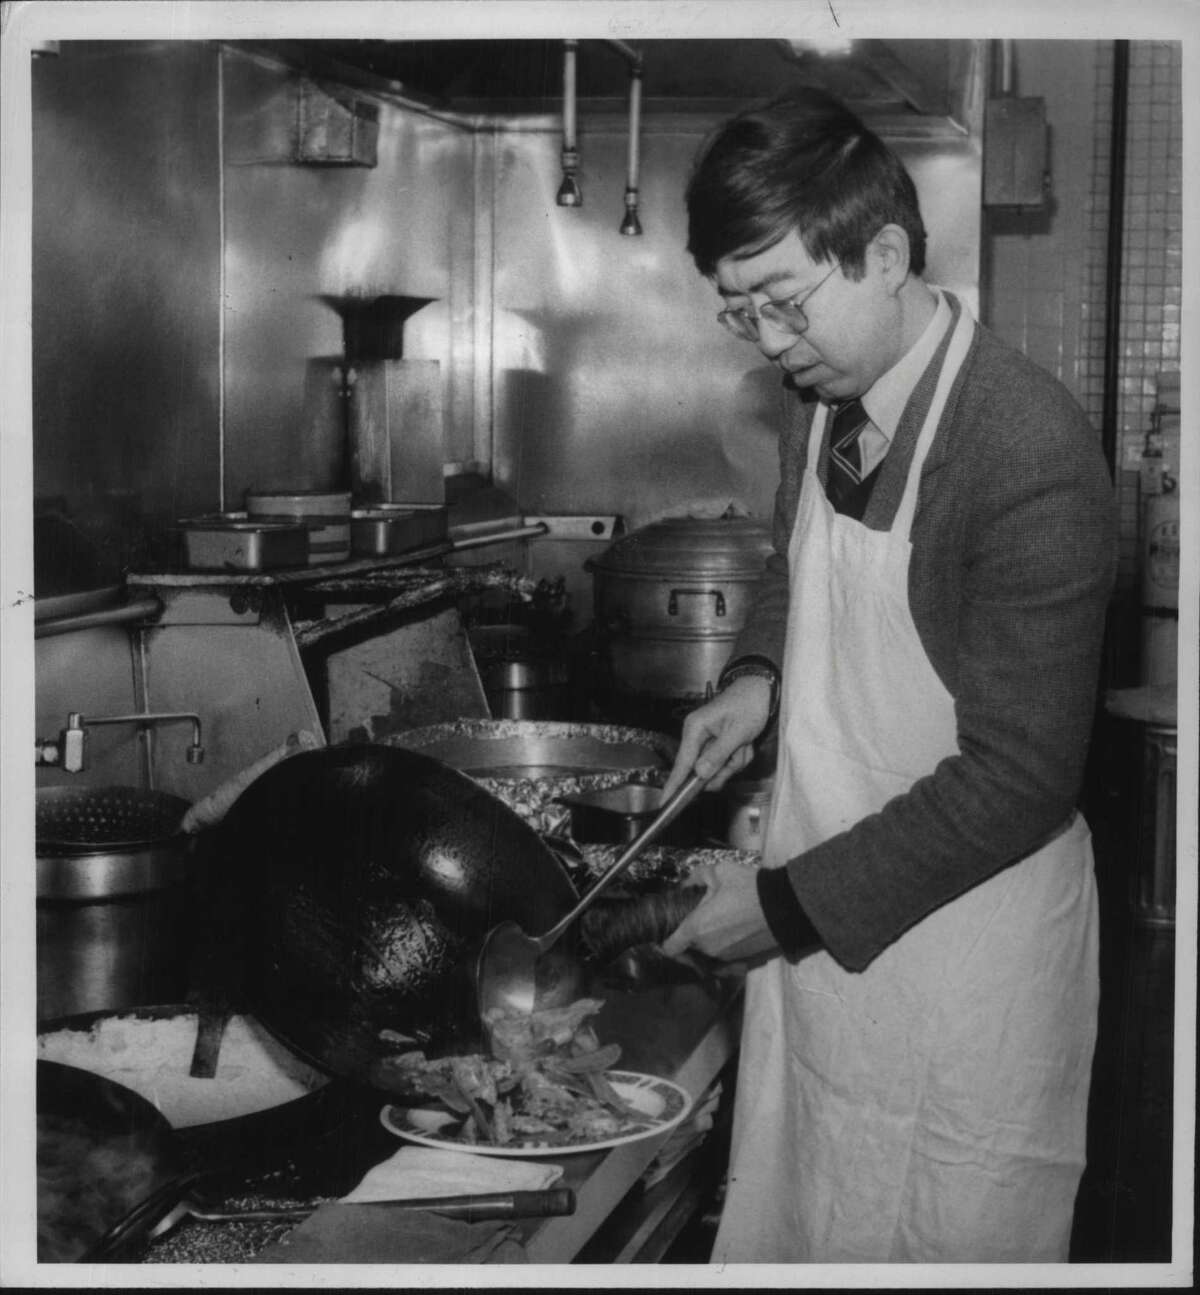 Hunan Restaurant, Albany, New York - Charles M. Chow of Albany, owner, making "Chef's Special" bean curd Undated (tofu). January 07, 1984 (Bob Richey/Times Union Archive)